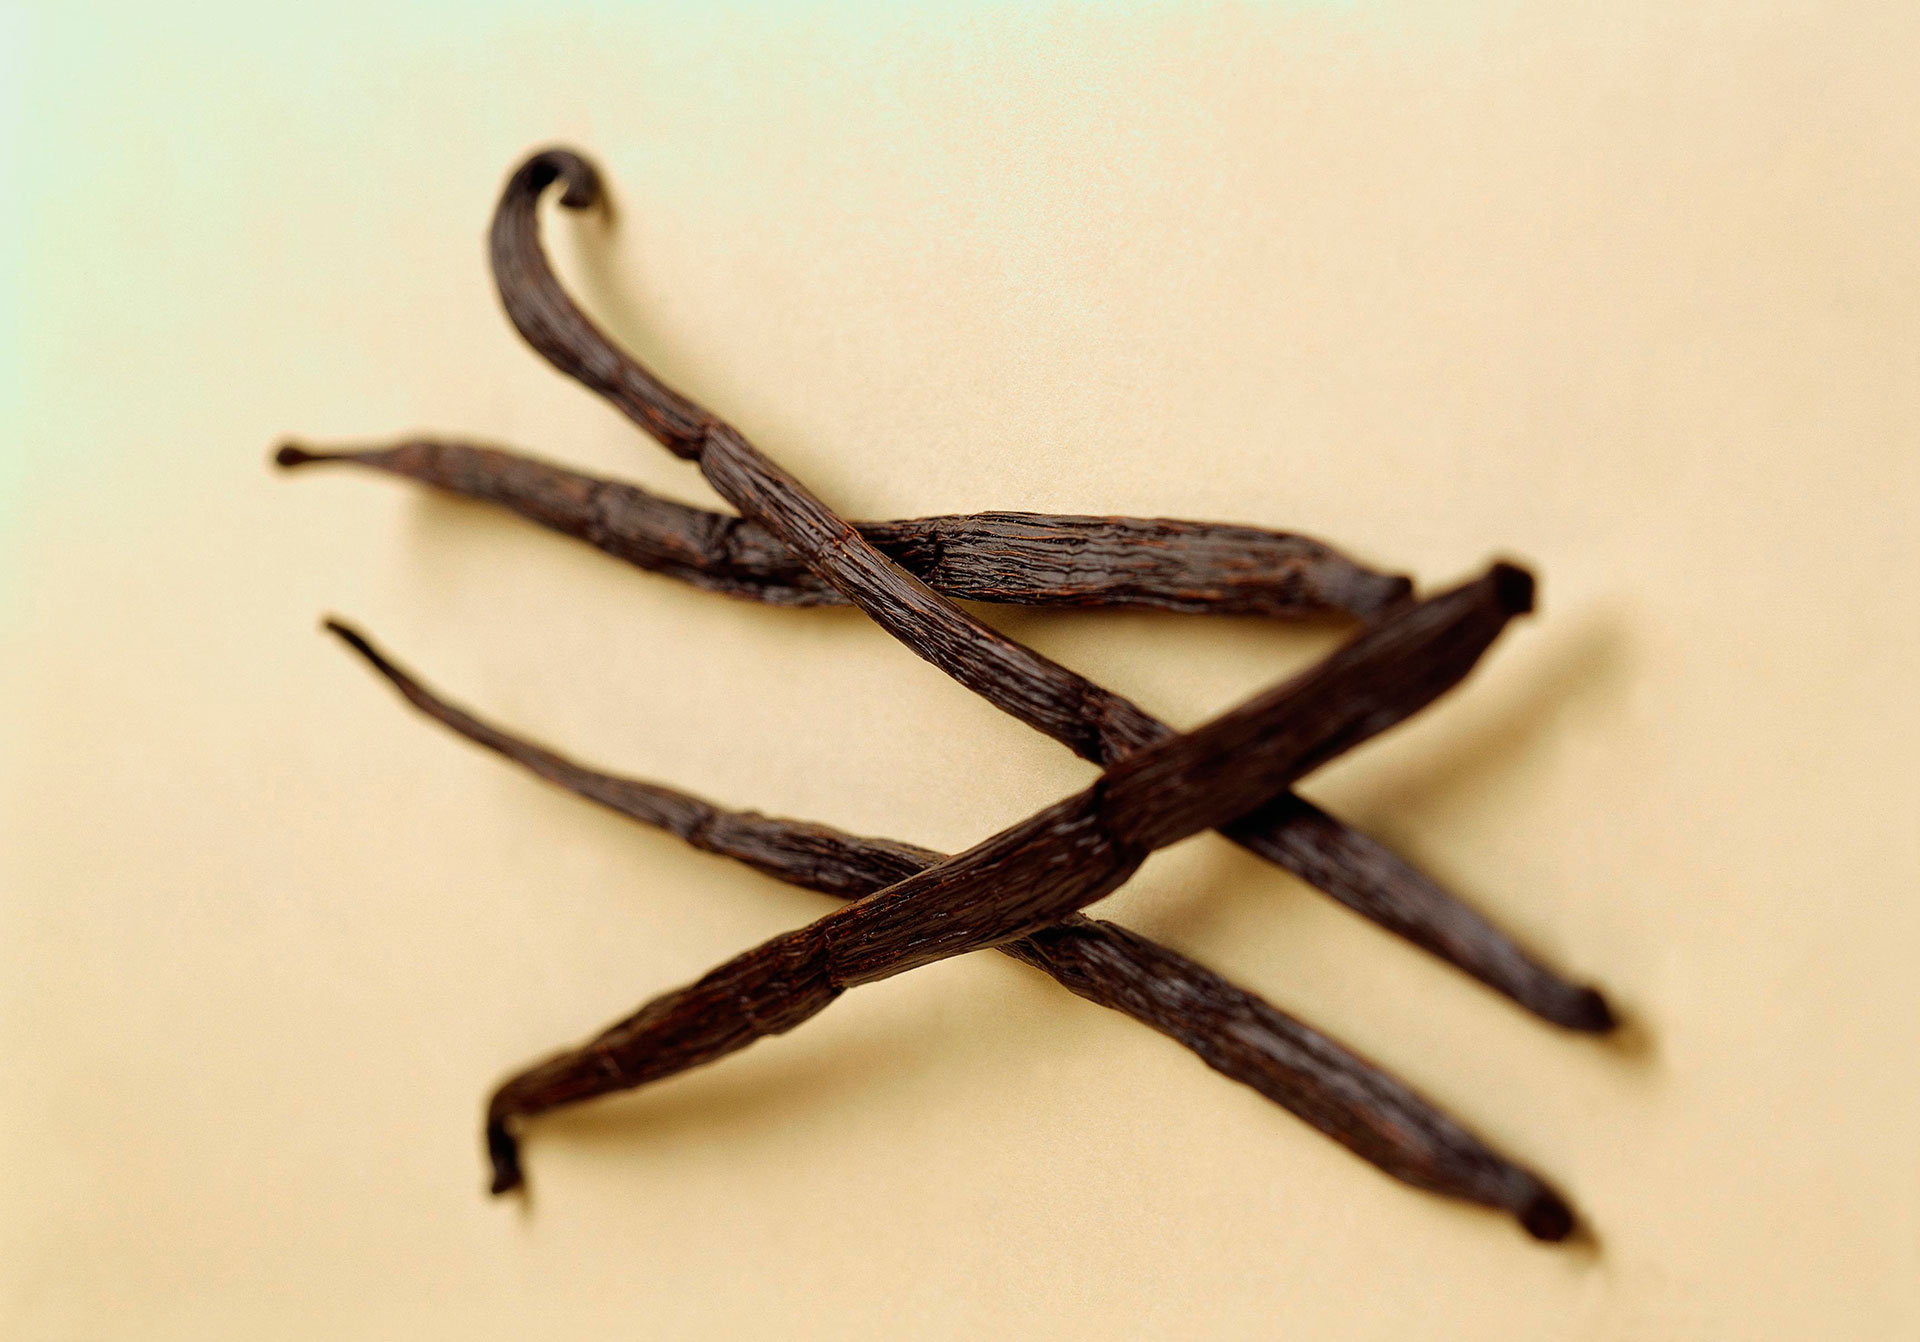 A team of international experts has selected vanilla as the world's favorite flavor (Getty Images)